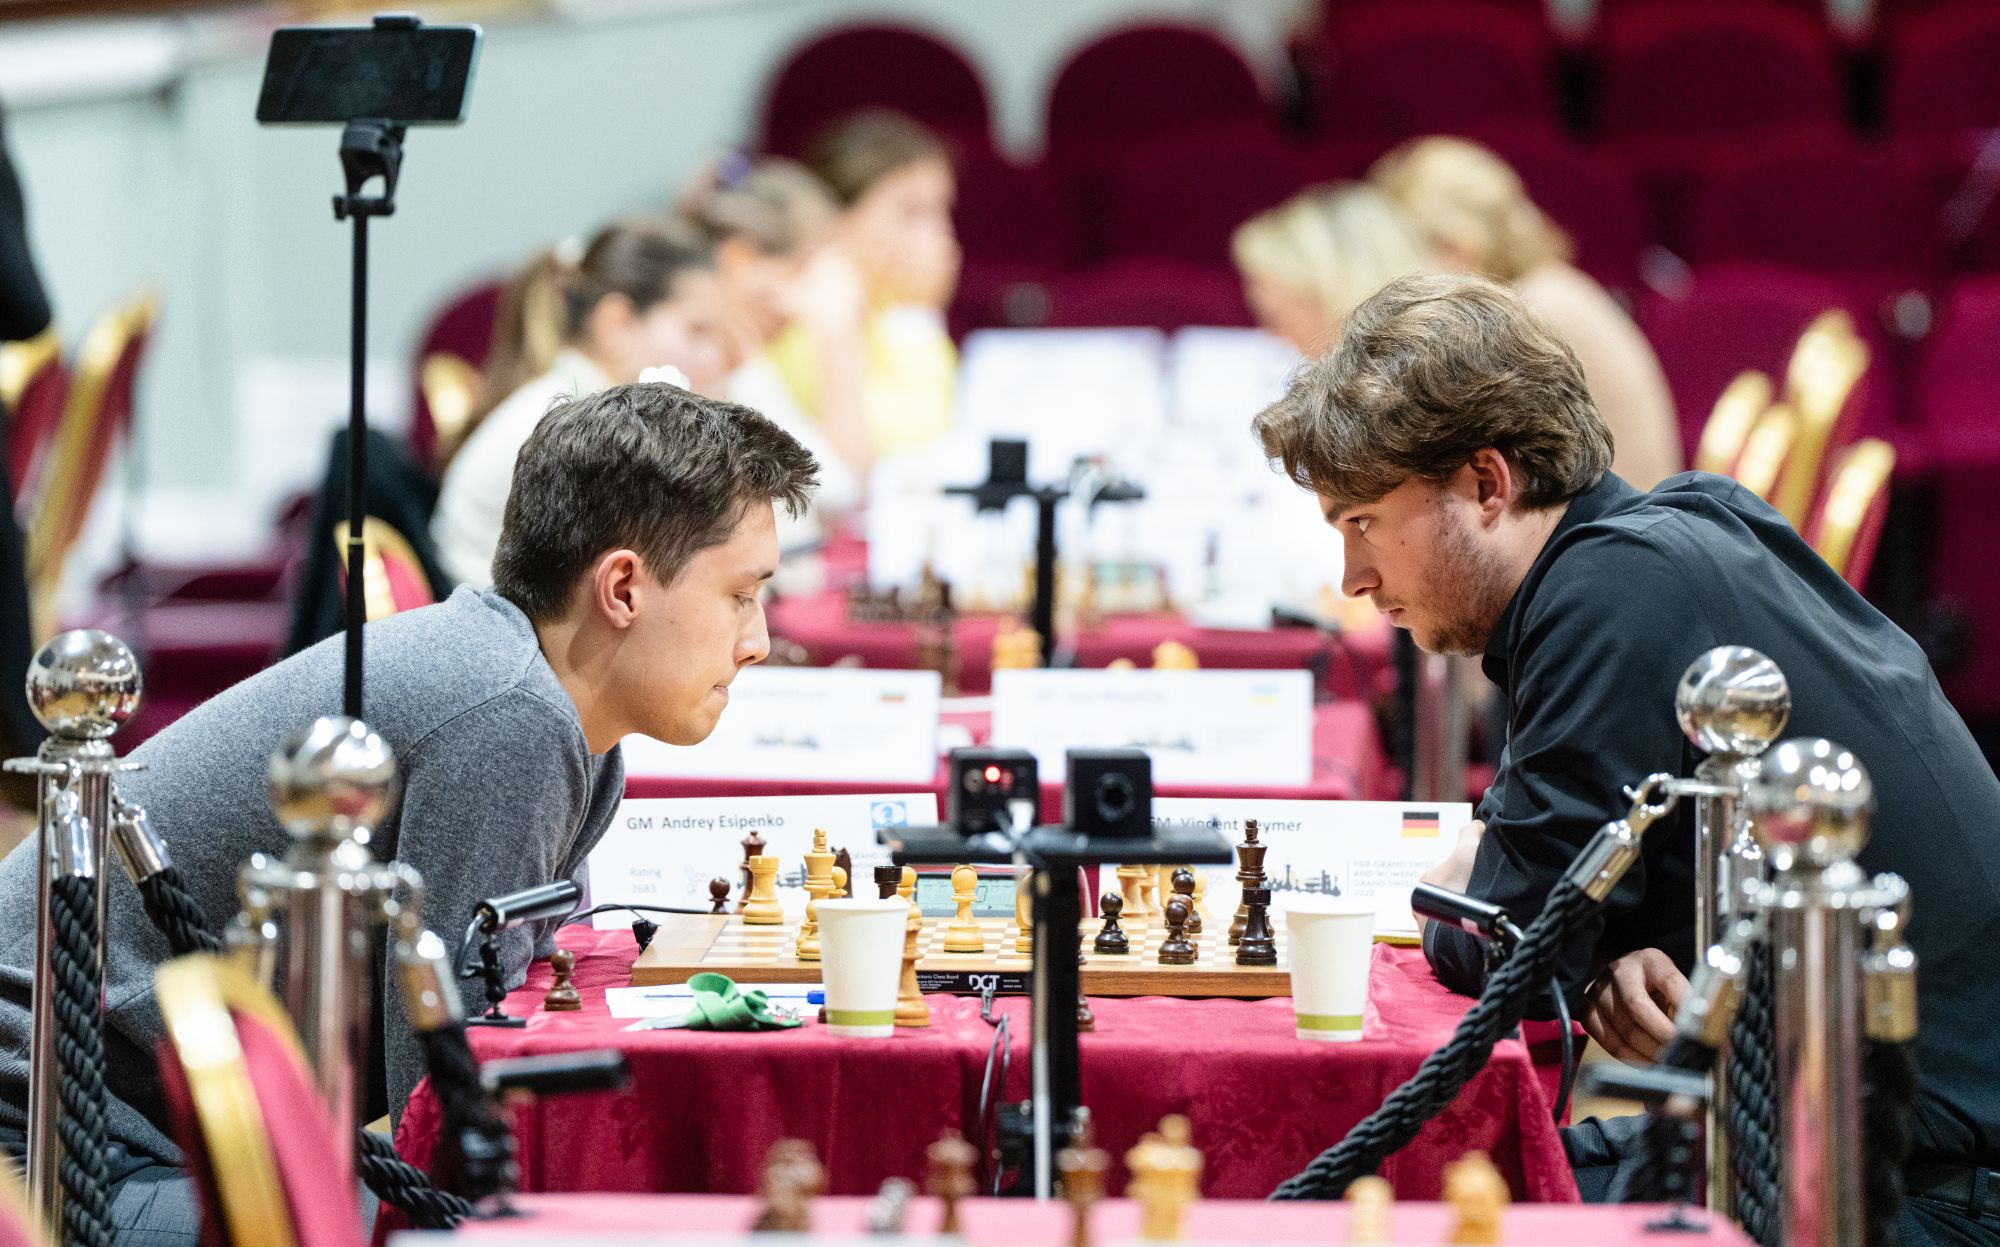 The chess games of Andrey Esipenko